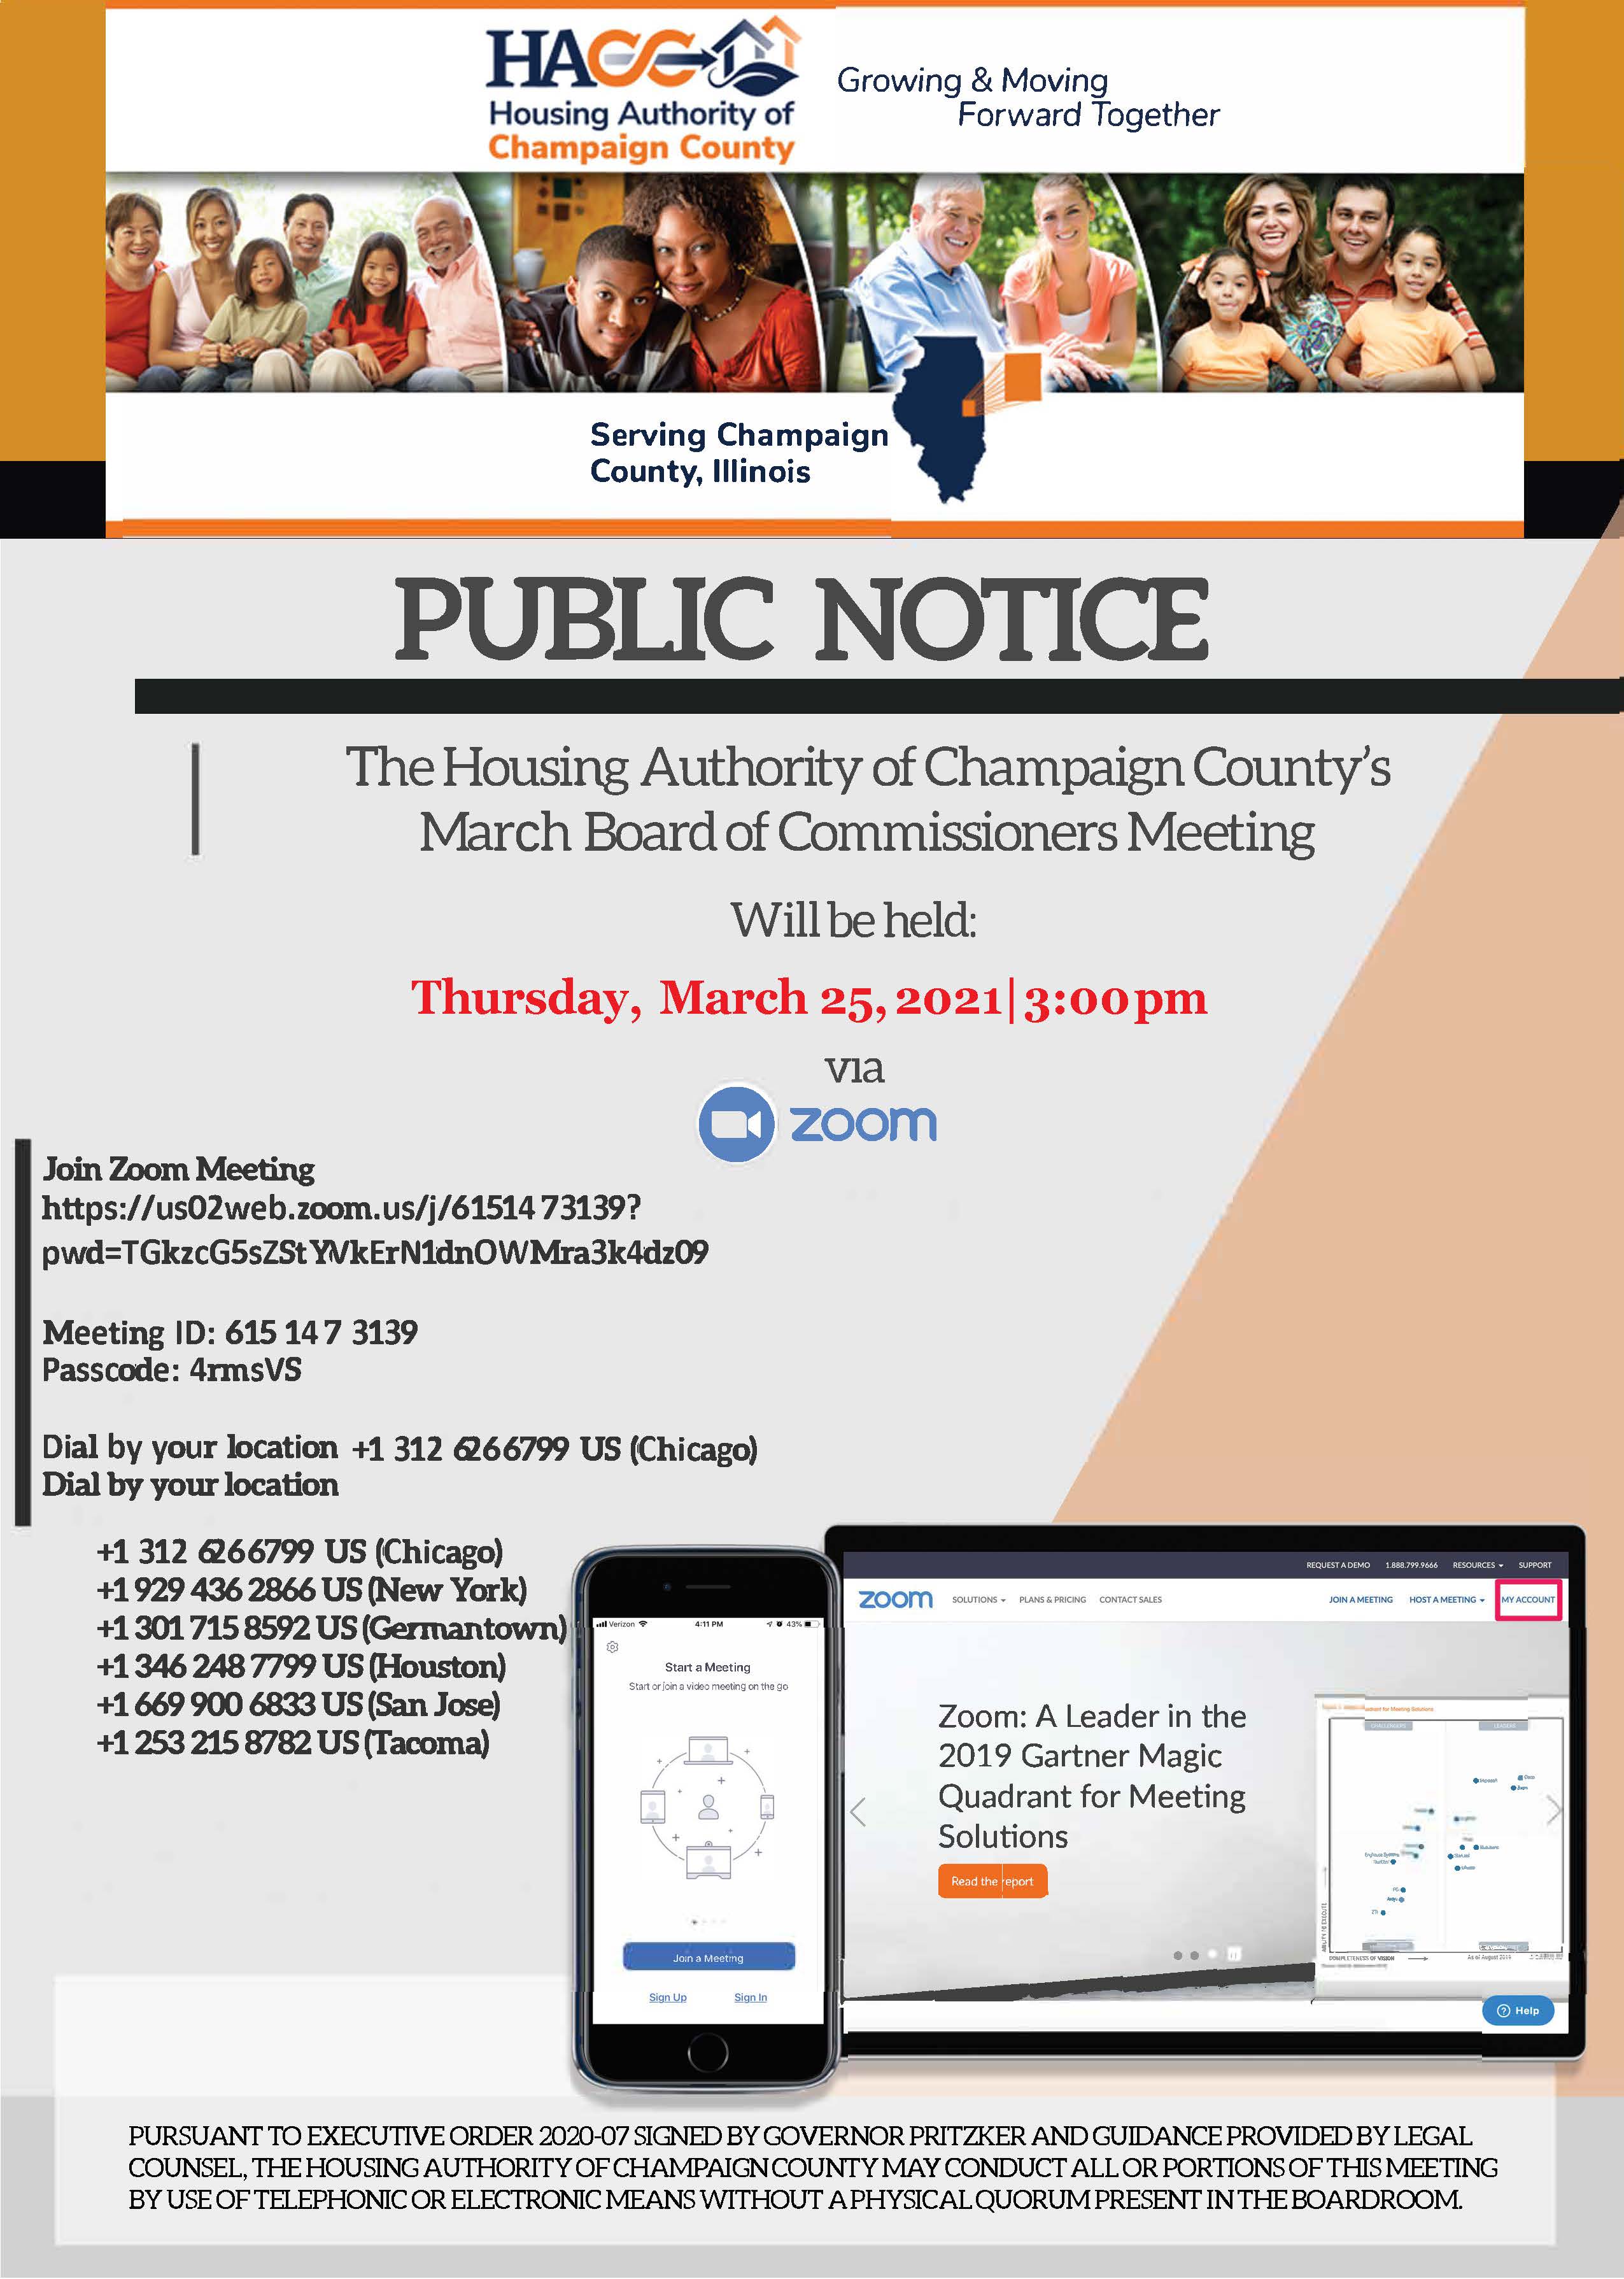 March Board of Commissioners Meeting Flyer, all information as listed below.